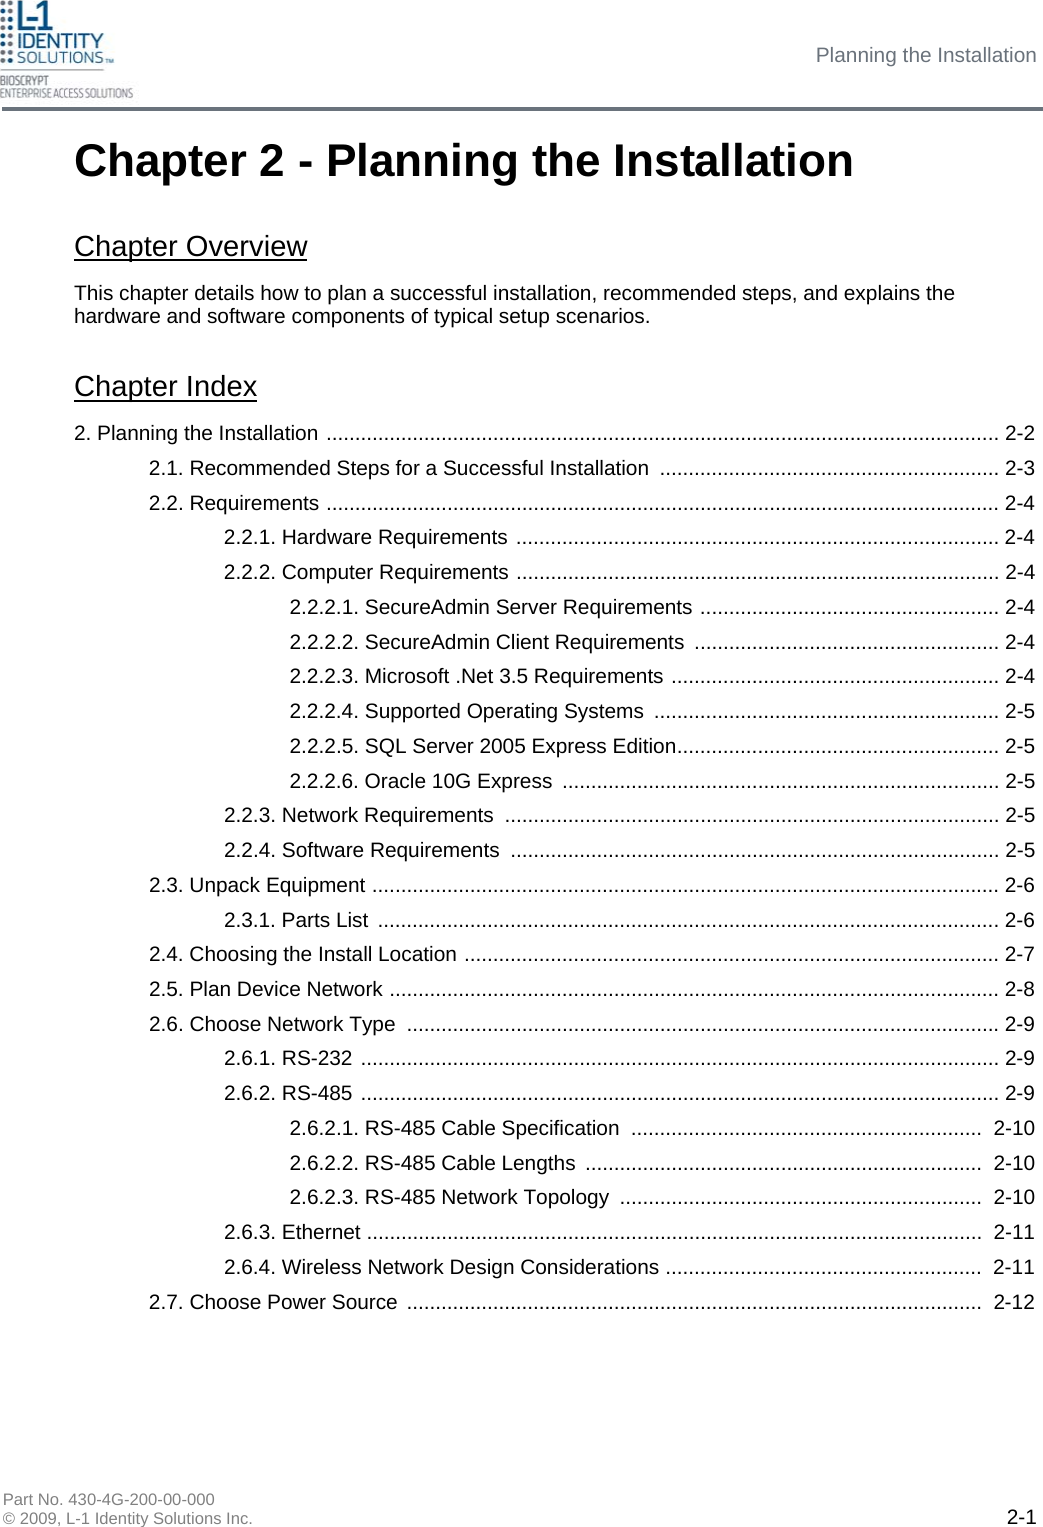 Planning the Installation Part No. 430-4G-200-00-000 © 2009, L-1 Identity Solutions Inc.  2-1 Chapter 2 - Planning the Installation This chapter details how to plan a successful installation, recommended steps, and explains the hardware and software components of typical setup scenarios. Chapter Index 2. Planning the Installation ..................................................................................................................... 2-2 2.1. Recommended Steps for a Successful Installation ........................................................... 2-3 2.2. Requirements ..................................................................................................................... 2-4 2.2.1. Hardware Requirements .................................................................................... 2-4 2.2.2. Computer Requirements .................................................................................... 2-4 2.2.2.1. SecureAdmin Server Requirements .................................................... 2-4 2.2.2.2. SecureAdmin Client Requirements  ..................................................... 2-4 2.2.2.3. Microsoft .Net 3.5 Requirements ......................................................... 2-4 2.2.2.4. Supported Operating Systems ............................................................ 2-5 2.2.2.5. SQL Server 2005 Express Edition........................................................ 2-5 2.2.2.6. Oracle 10G Express ............................................................................ 2-5 2.2.3. Network Requirements ...................................................................................... 2-5 2.2.4. Software Requirements ..................................................................................... 2-5 2.3. Unpack Equipment ............................................................................................................. 2-6 2.3.1. Parts List  ............................................................................................................ 2-6 2.4. Choosing the Install Location ............................................................................................. 2-7 2.5. Plan Device Network .......................................................................................................... 2-8 2.6. Choose Network Type  ....................................................................................................... 2-9 2.6.1. RS-232 ............................................................................................................... 2-9 2.6.2. RS-485 ............................................................................................................... 2-9 2.6.2.1. RS-485 Cable Specification .............................................................  2-10 2.6.2.2. RS-485 Cable Lengths  .....................................................................  2-10 2.6.2.3. RS-485 Network Topology ...............................................................  2-10 2.6.3. Ethernet ...........................................................................................................  2-11 2.6.4. Wireless Network Design Considerations .......................................................  2-11 2.7. Choose Power Source ....................................................................................................  2-12 Chapter Overview 